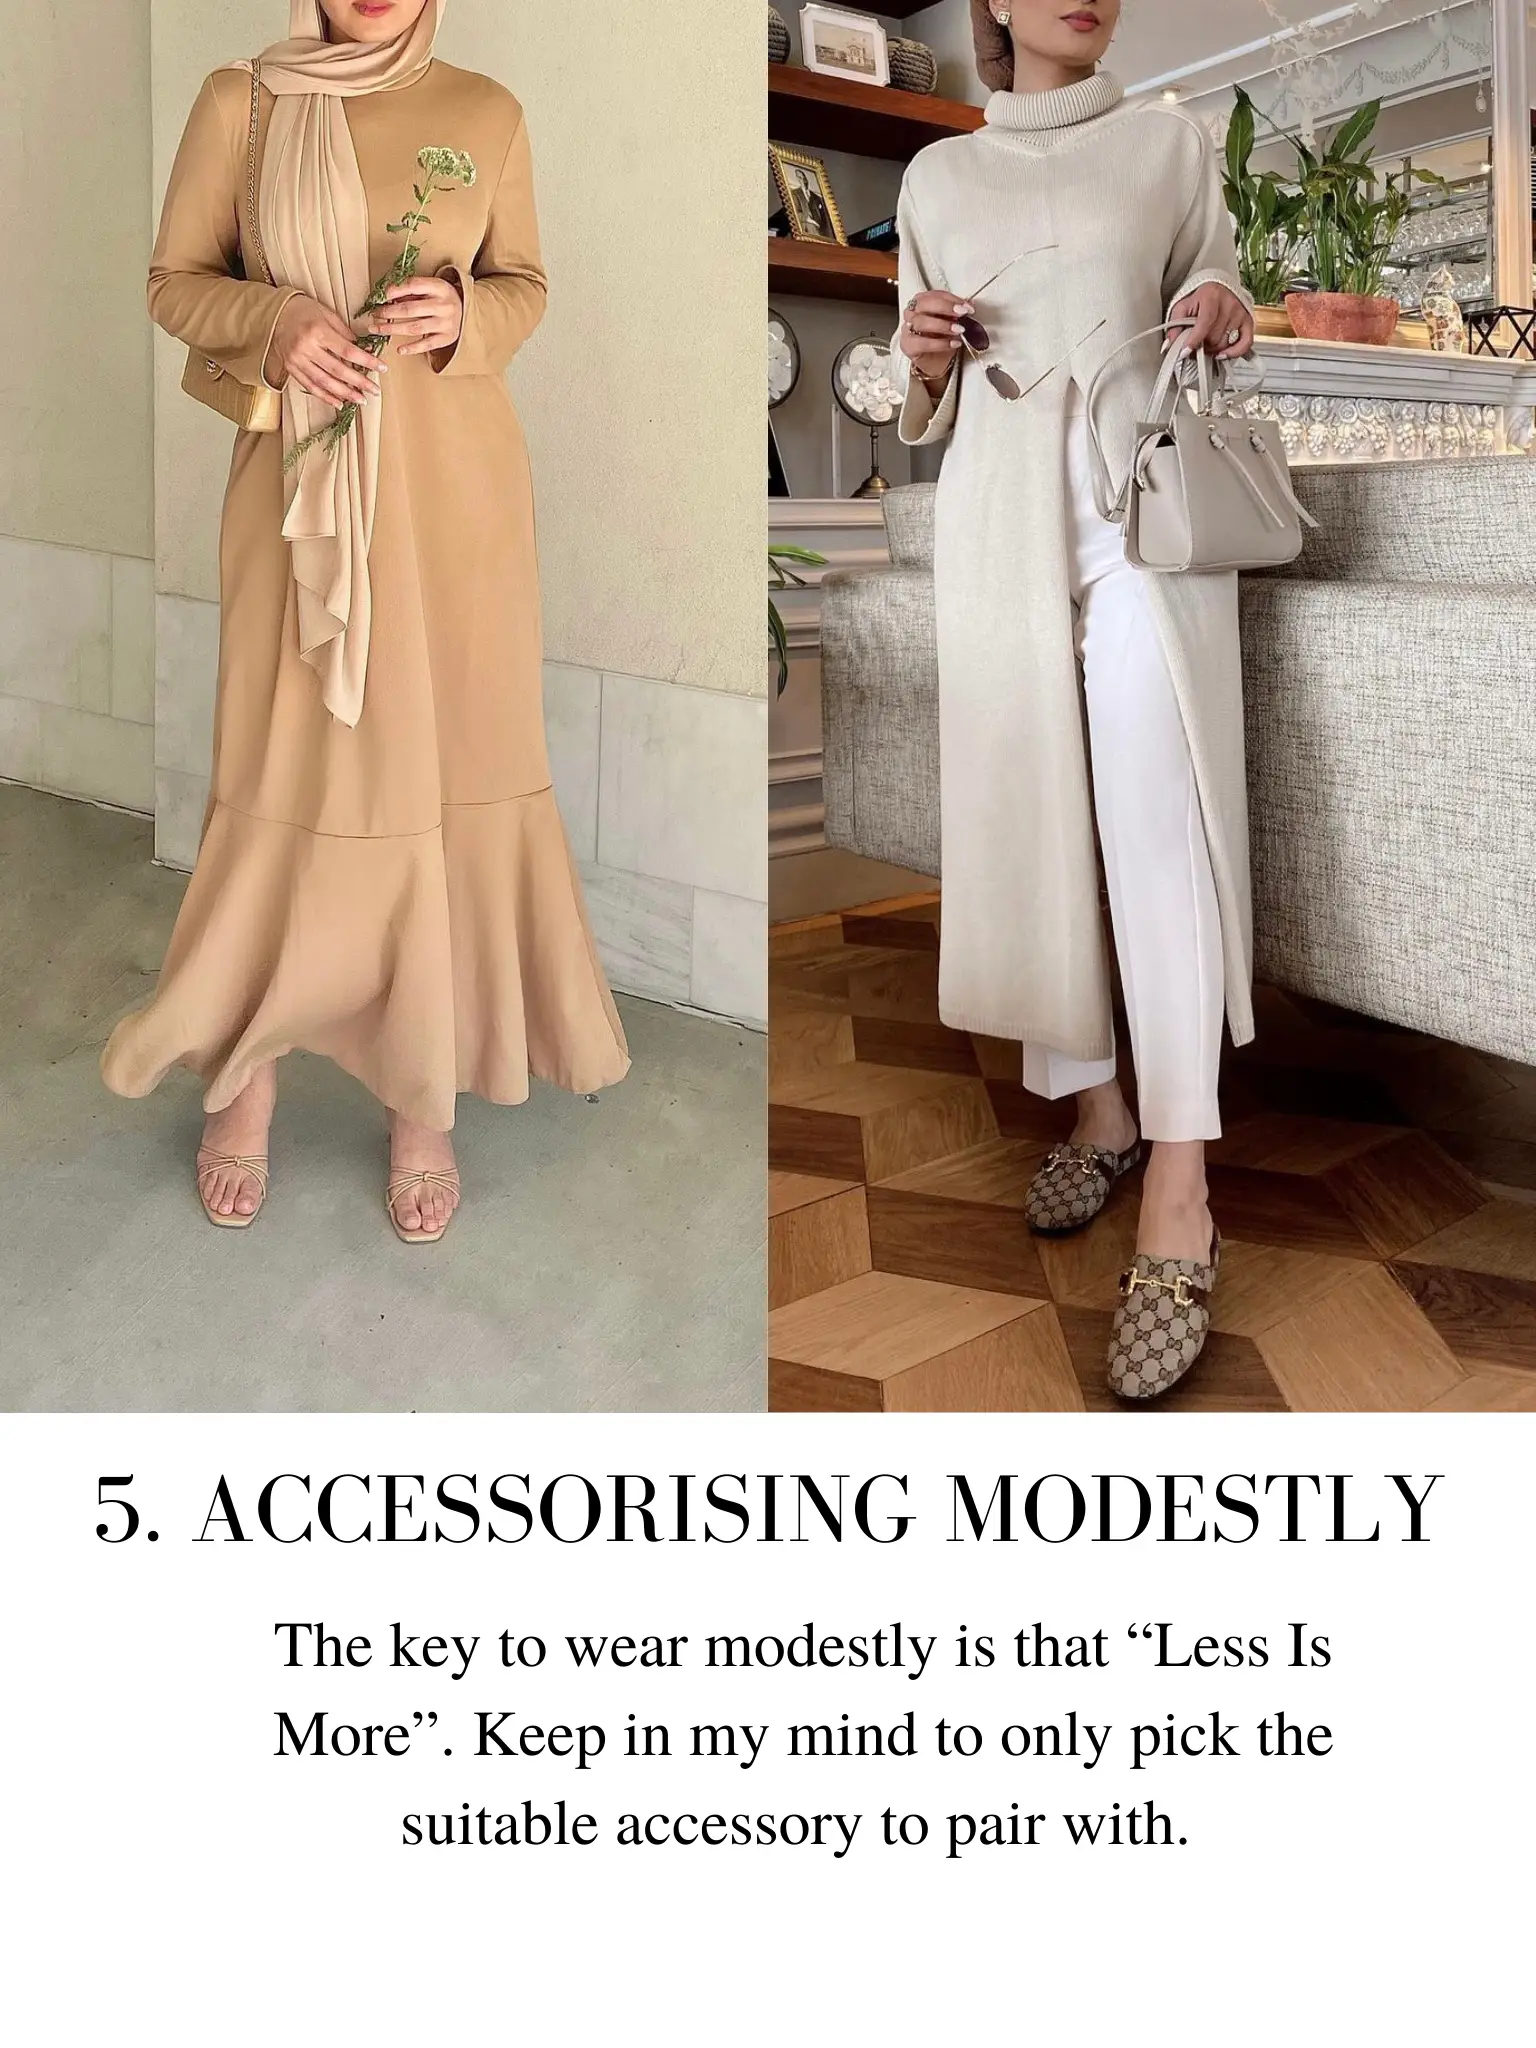 5 Tips To Look Feminine In Modest Look's images(5)